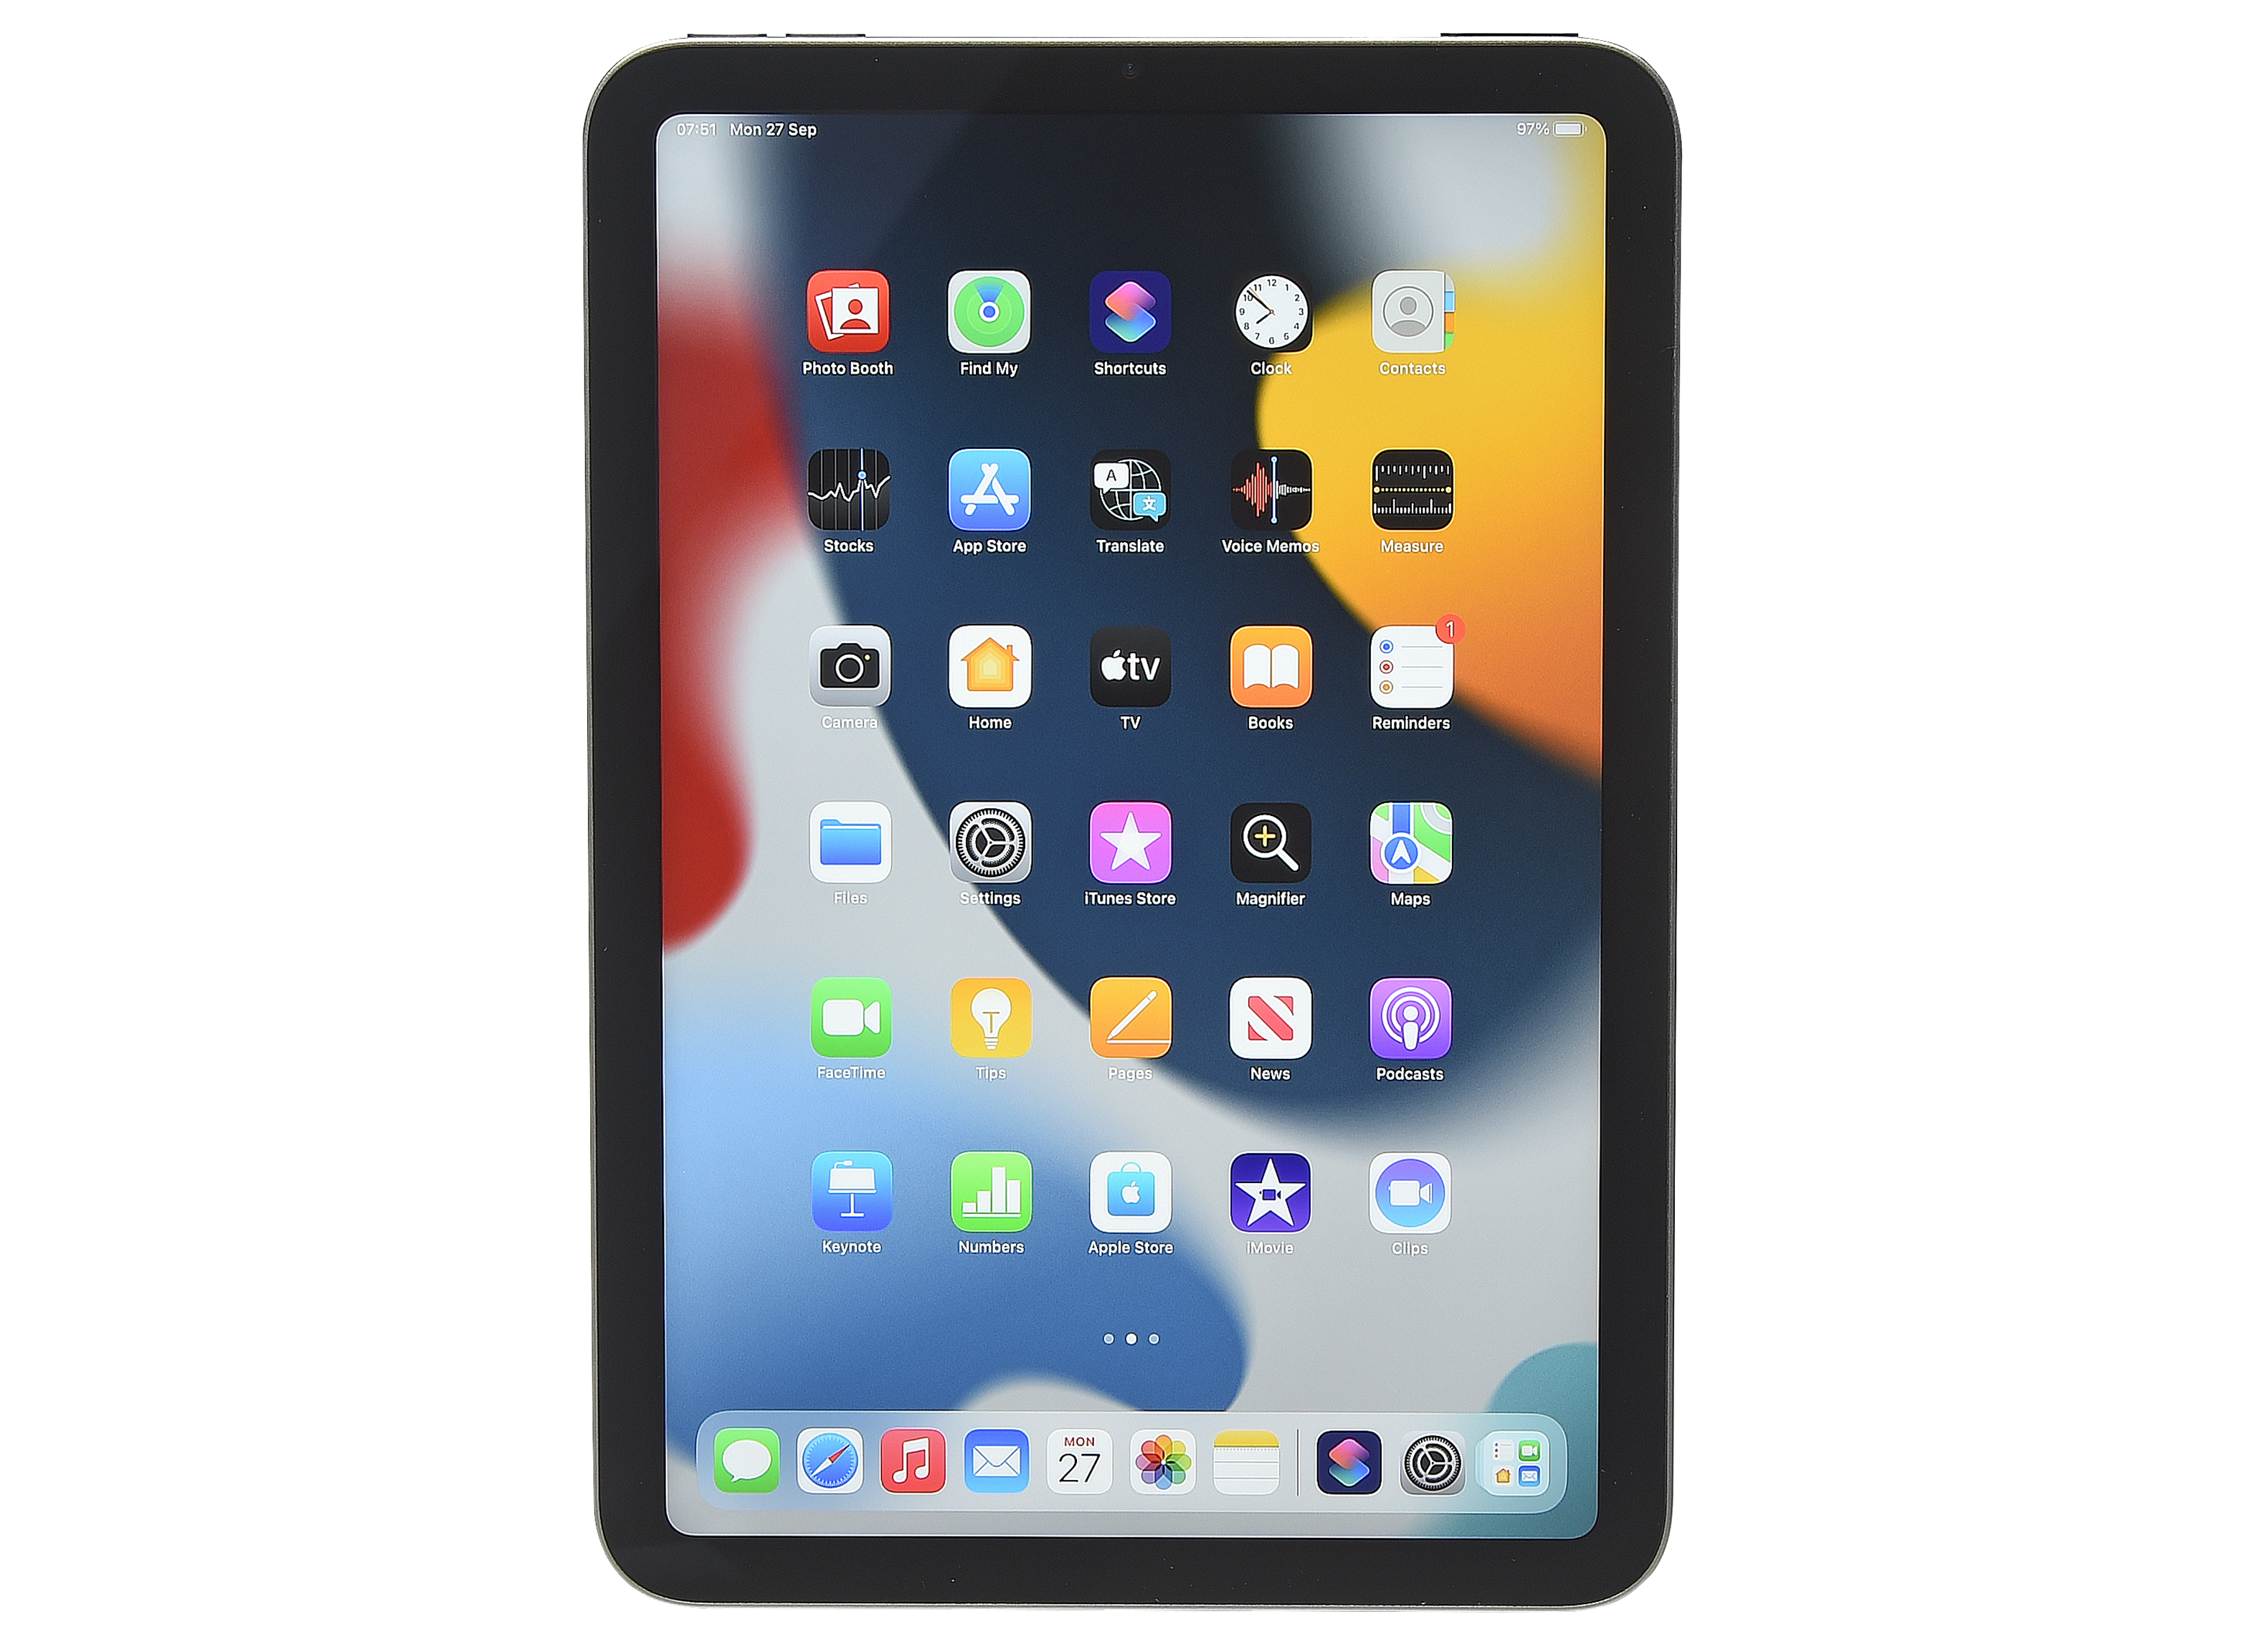 Apple iPad Reports 64GB)-2021 Consumer - Review Tablet (5G, Mini